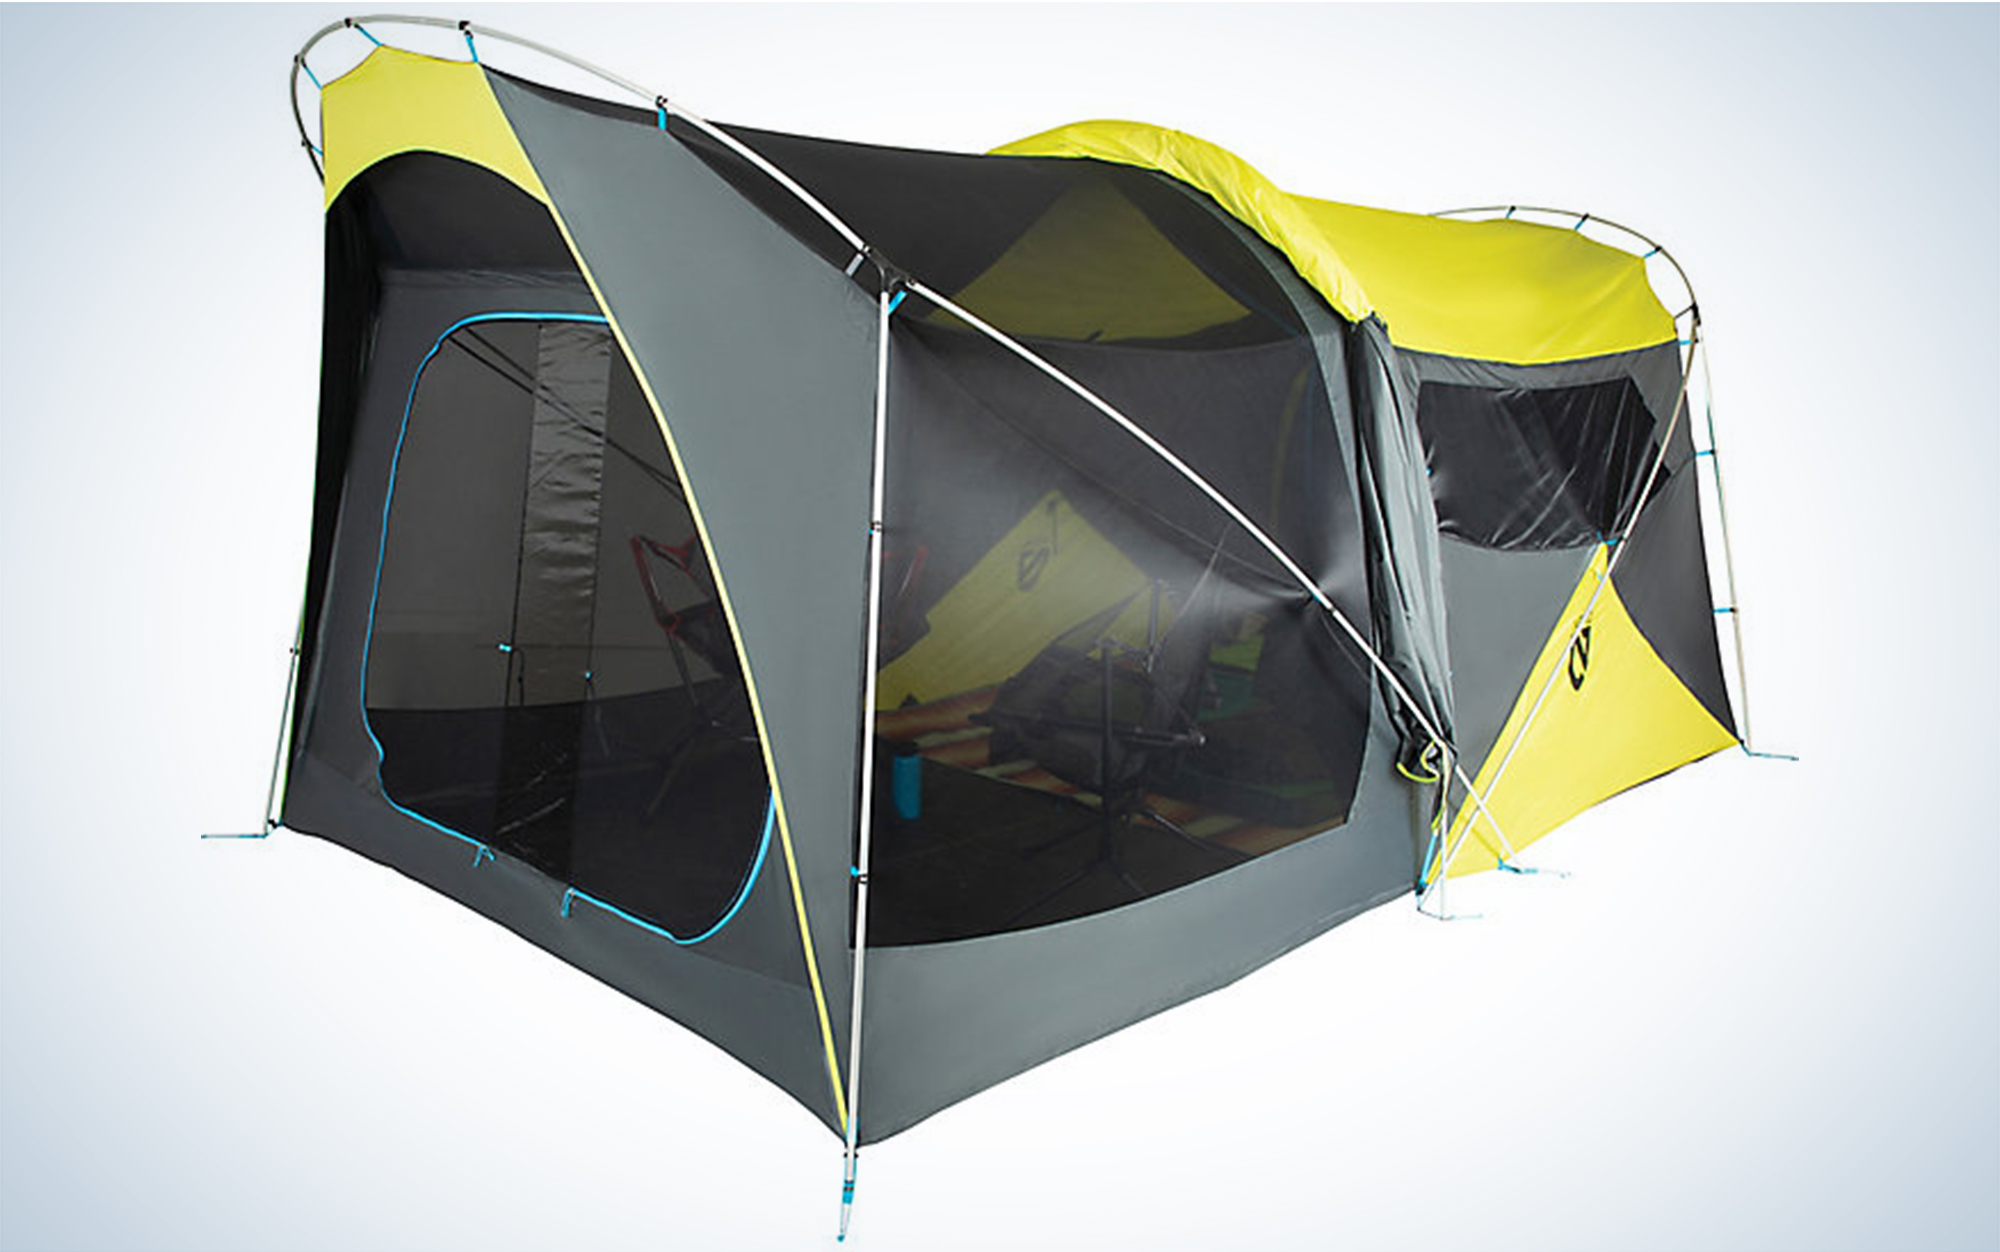 The NEMO Wagontop 8-Person Camping Tent is one of the best camping tents.